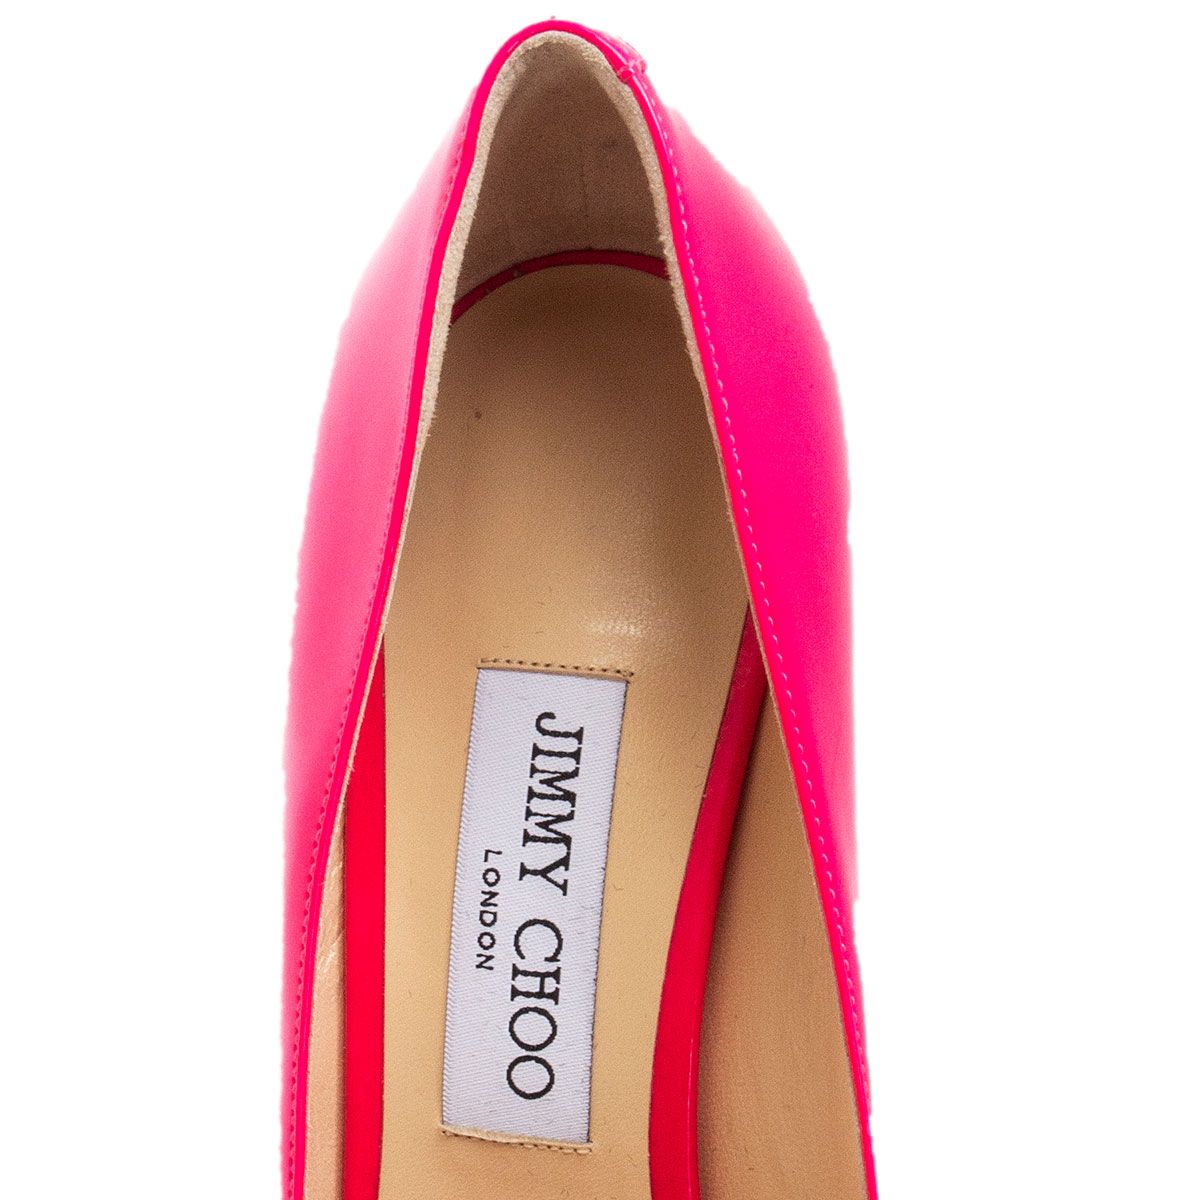 Jimmy Choo Romy 85 Pointed Toe Pumps Pink Patent Leather